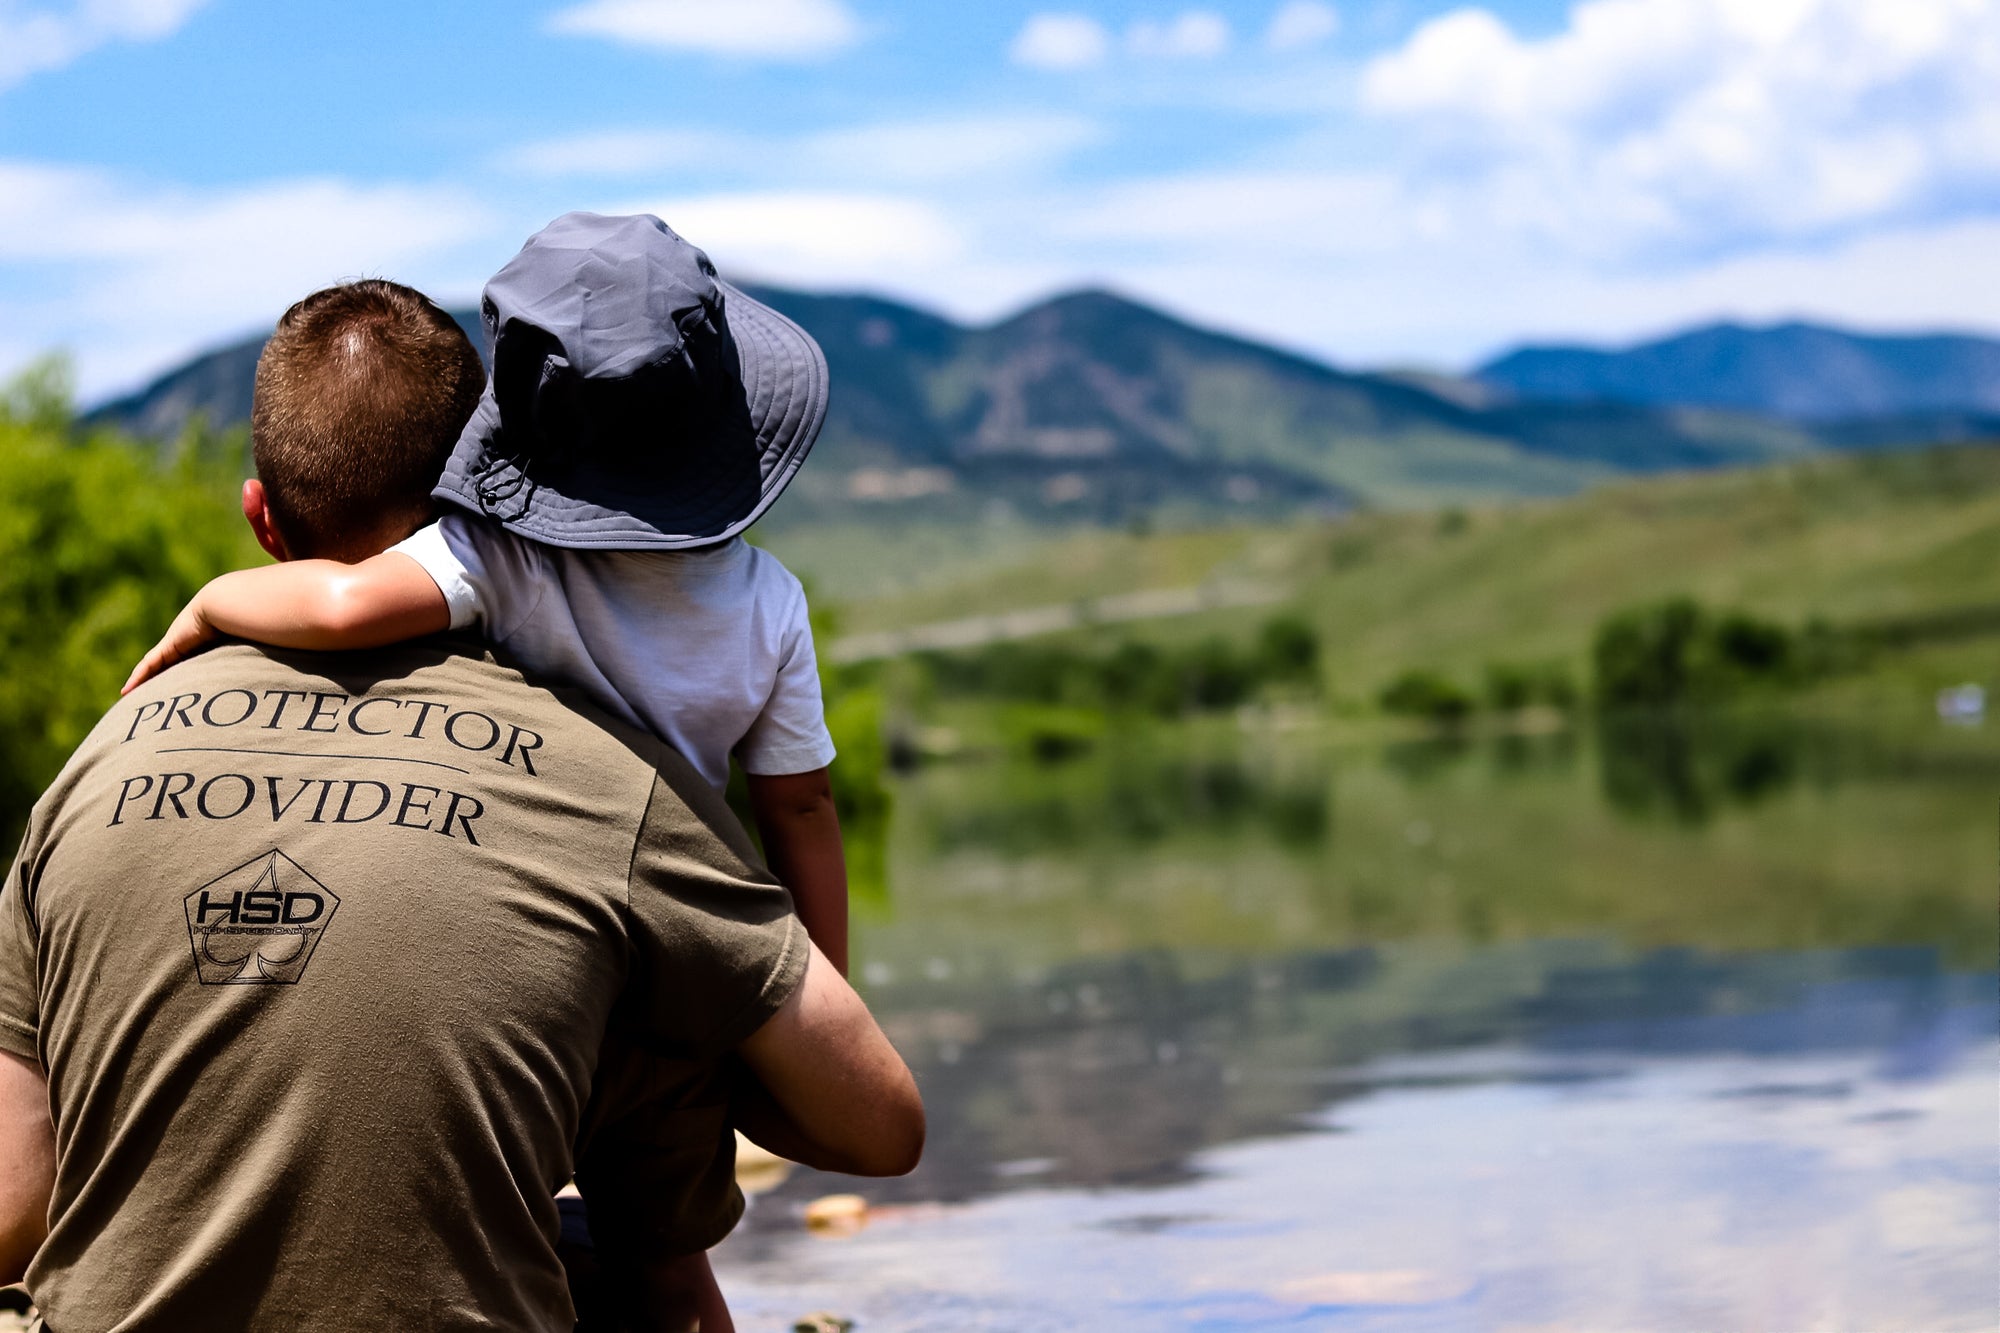 Busy Dad's Guide To Making Time For Self-Care | HighSpeedDaddy